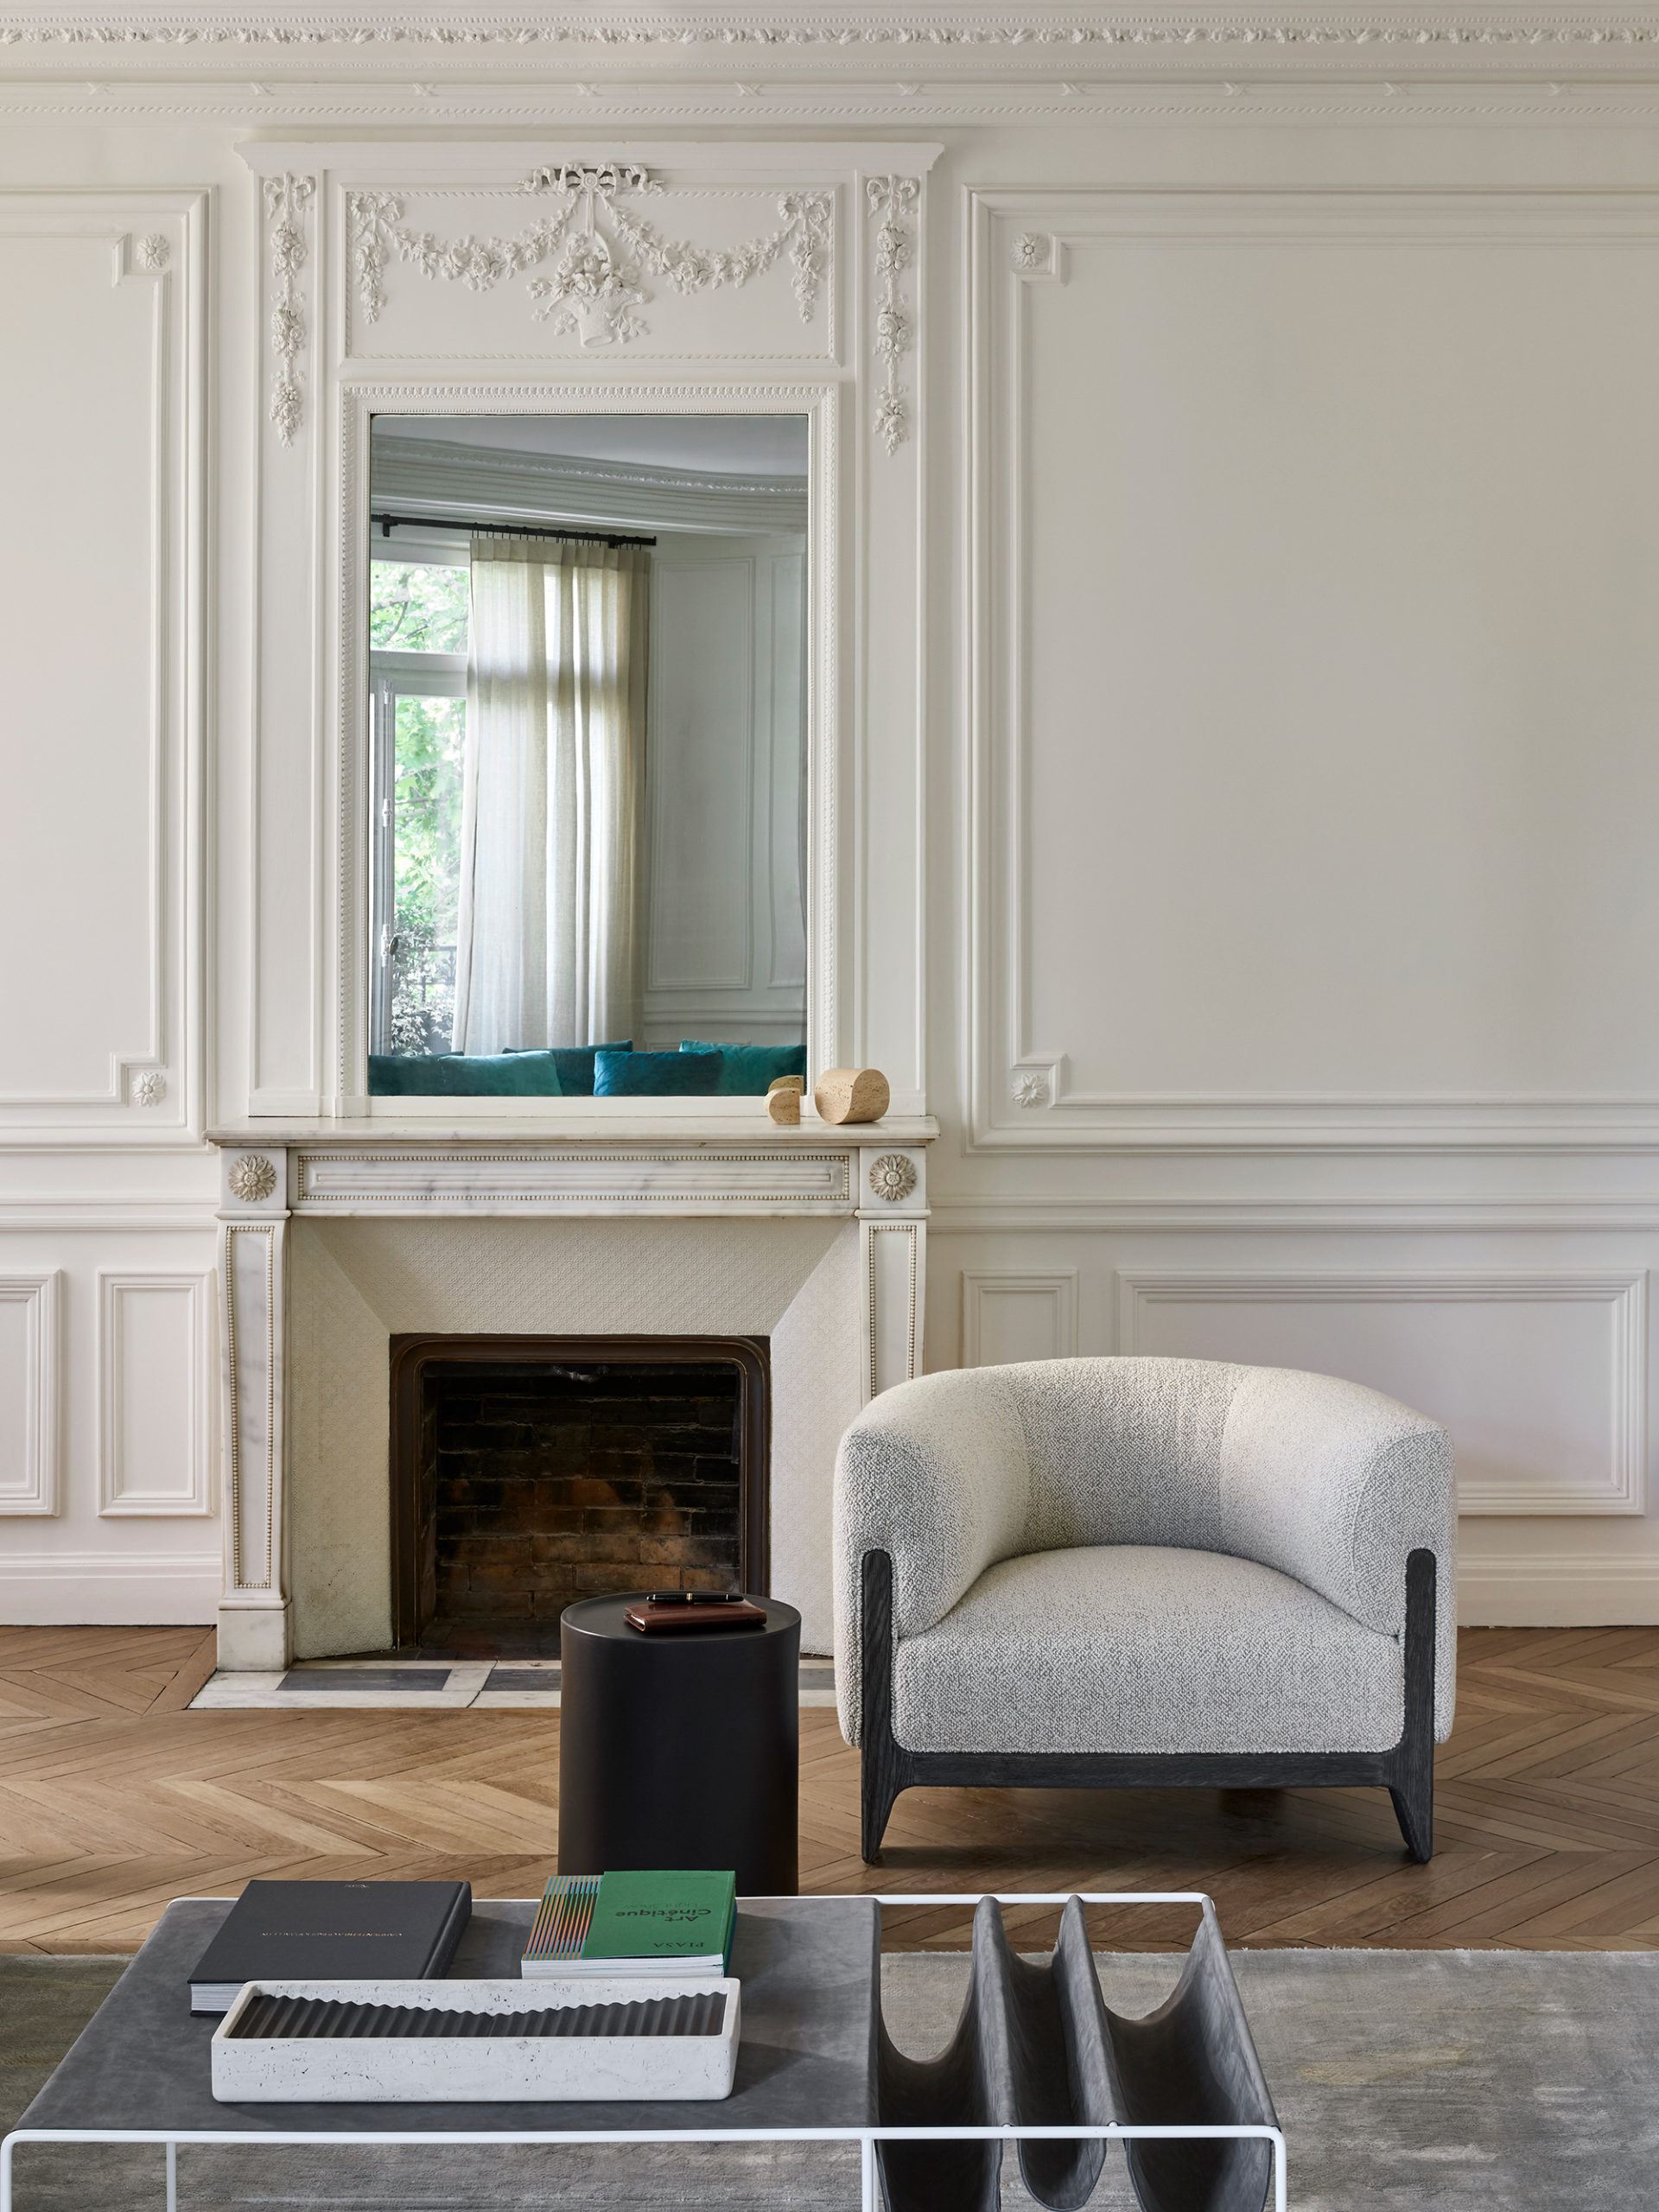 Declourt Collection - BOB chair - SUE low table - IKO side table